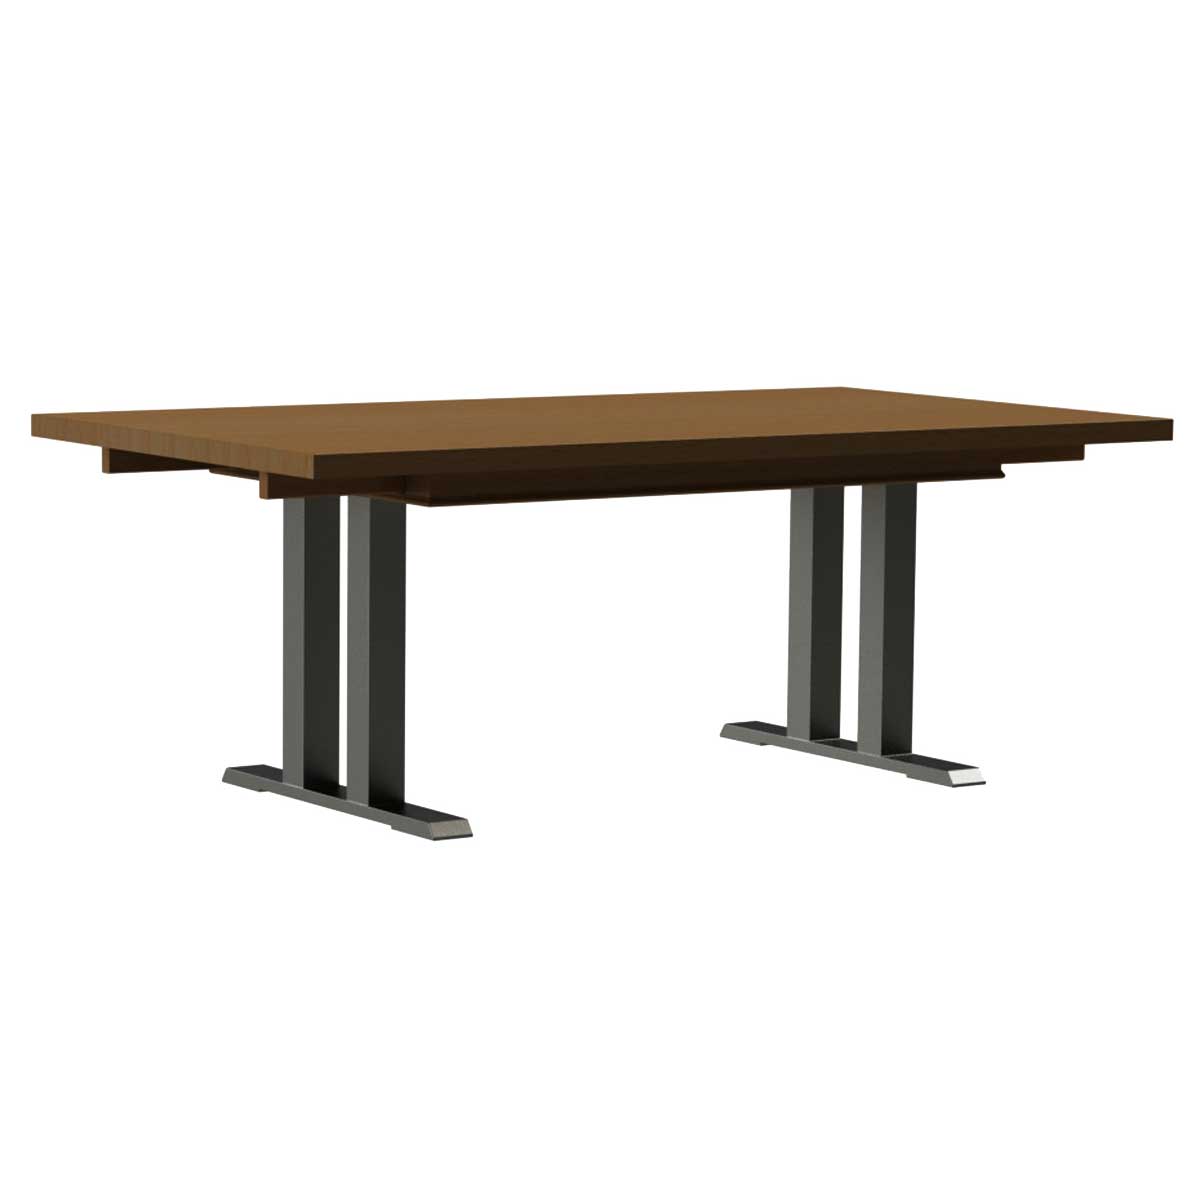 Tellus Live Edge Table Base - snyders.furniture